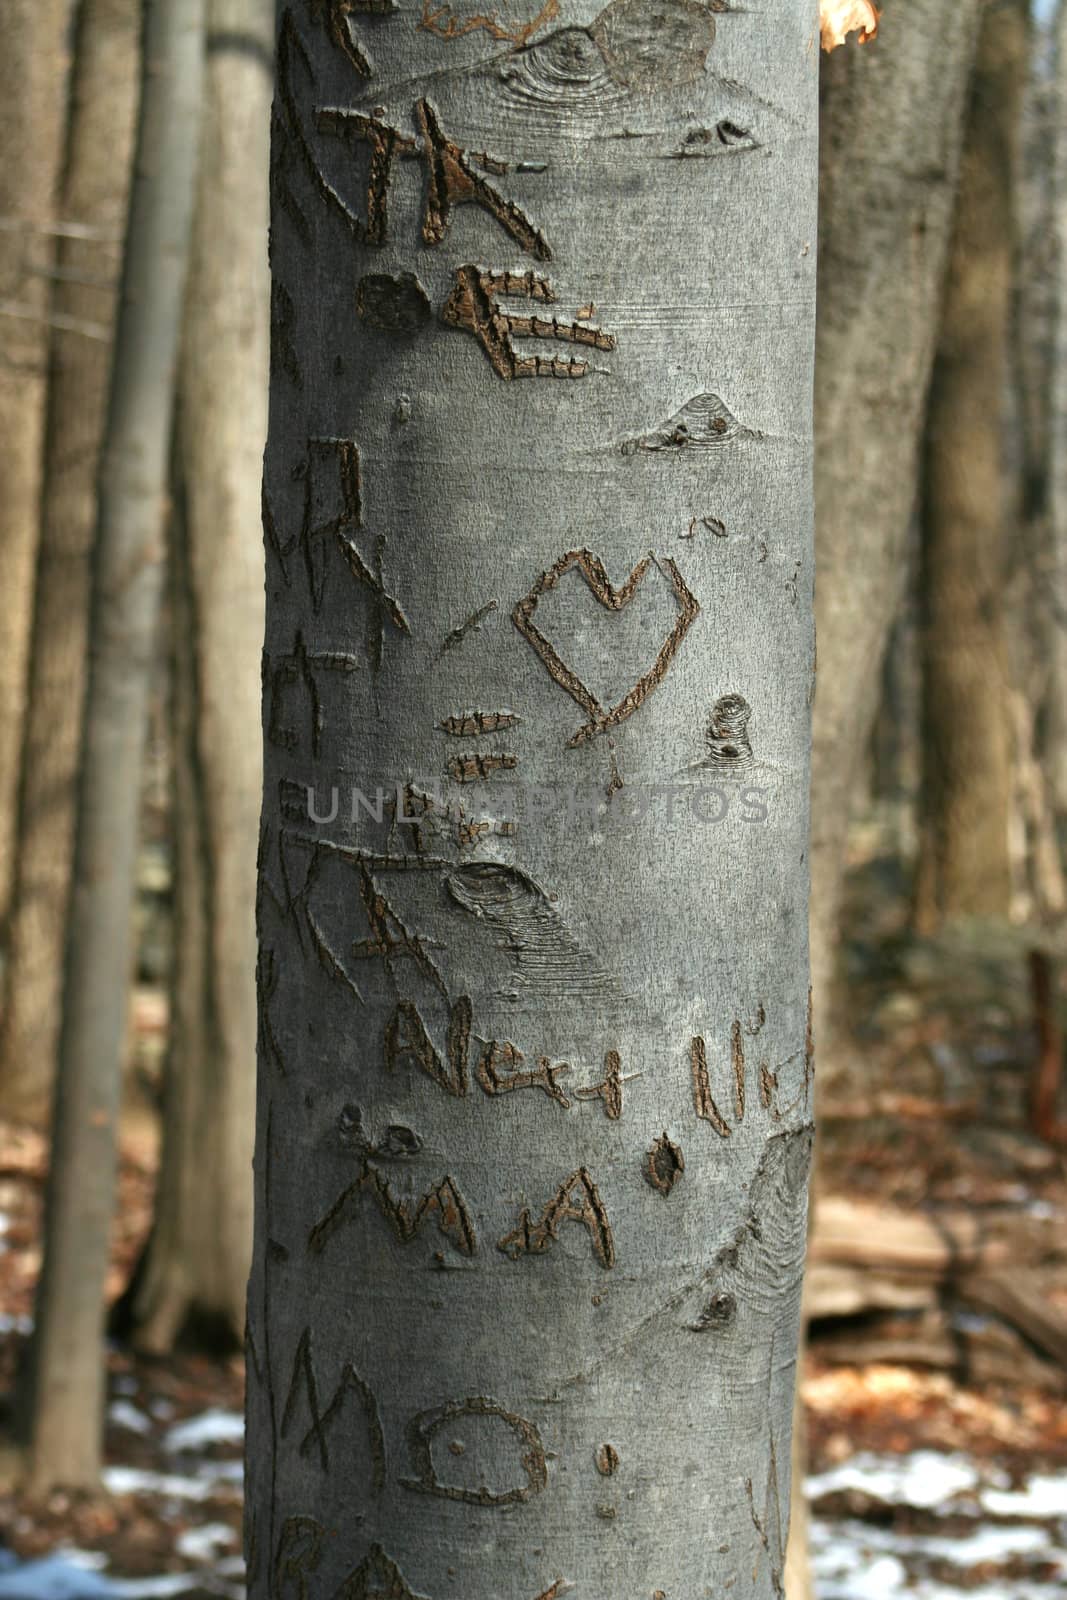 Carved sweetheart tree in the woods by njnightsky